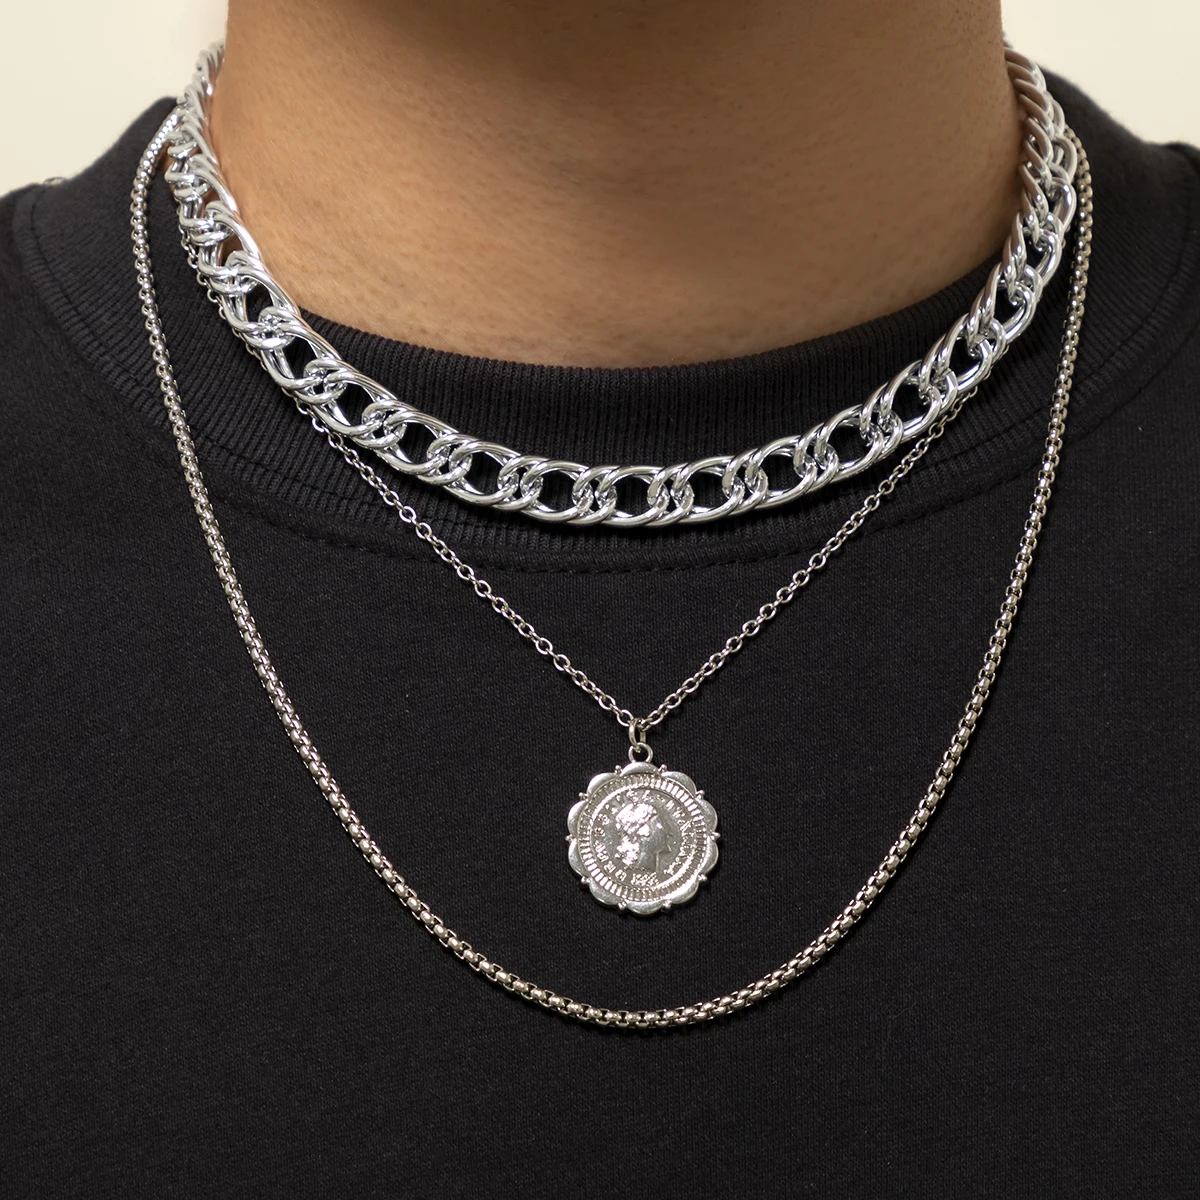 

SHIXIN Classic Portrait Coin Pendant Necklace Hip Hop 3 Layer Silver Link Chain Necklace Jewelry Necklace for Men Women